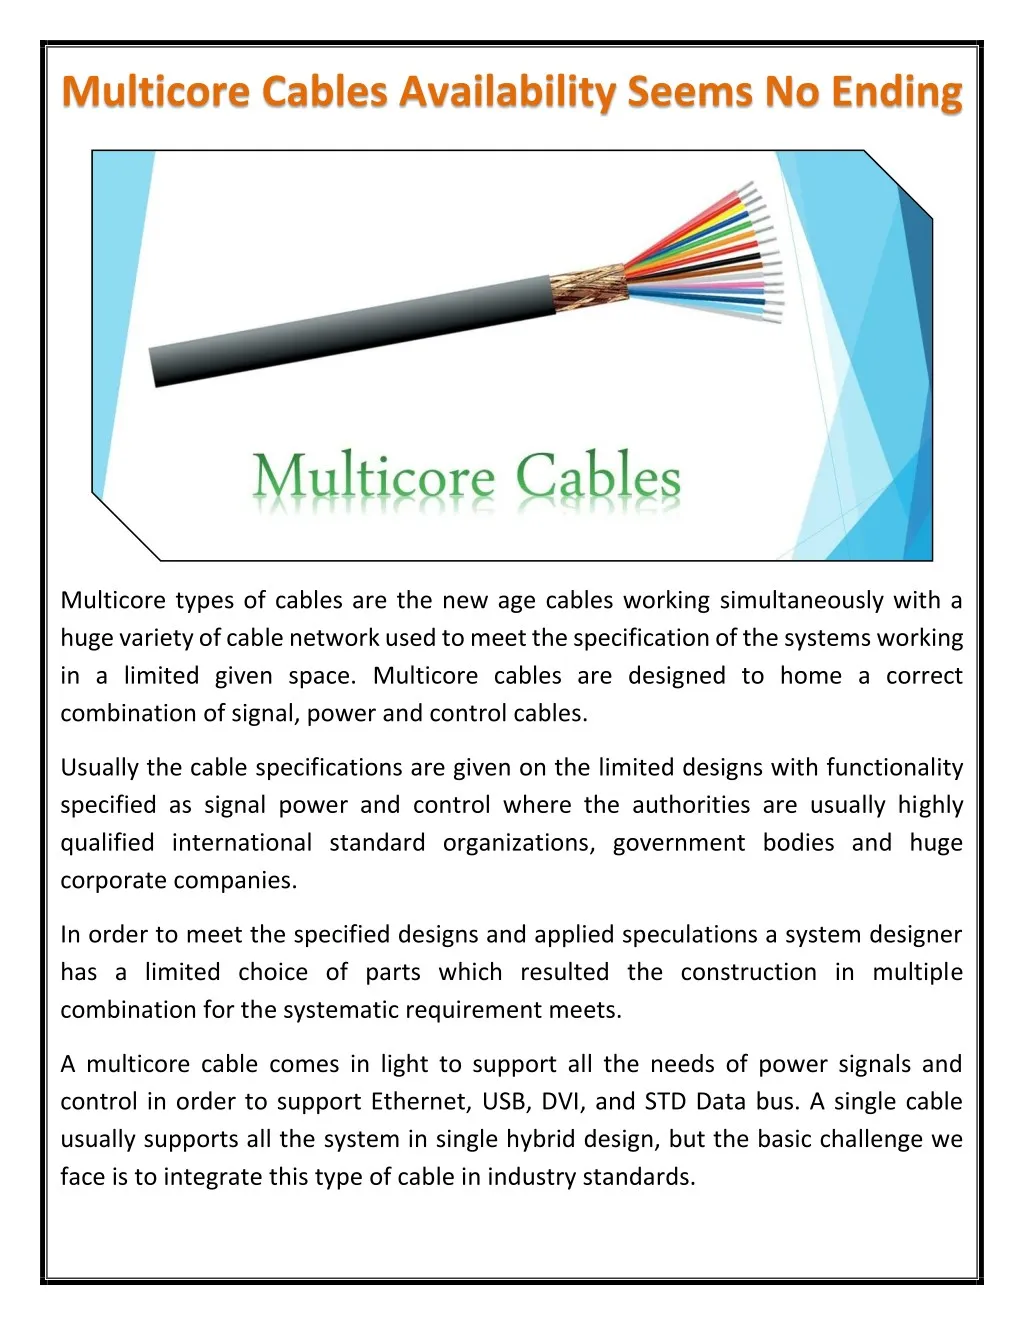 multicore cables availability seems no ending